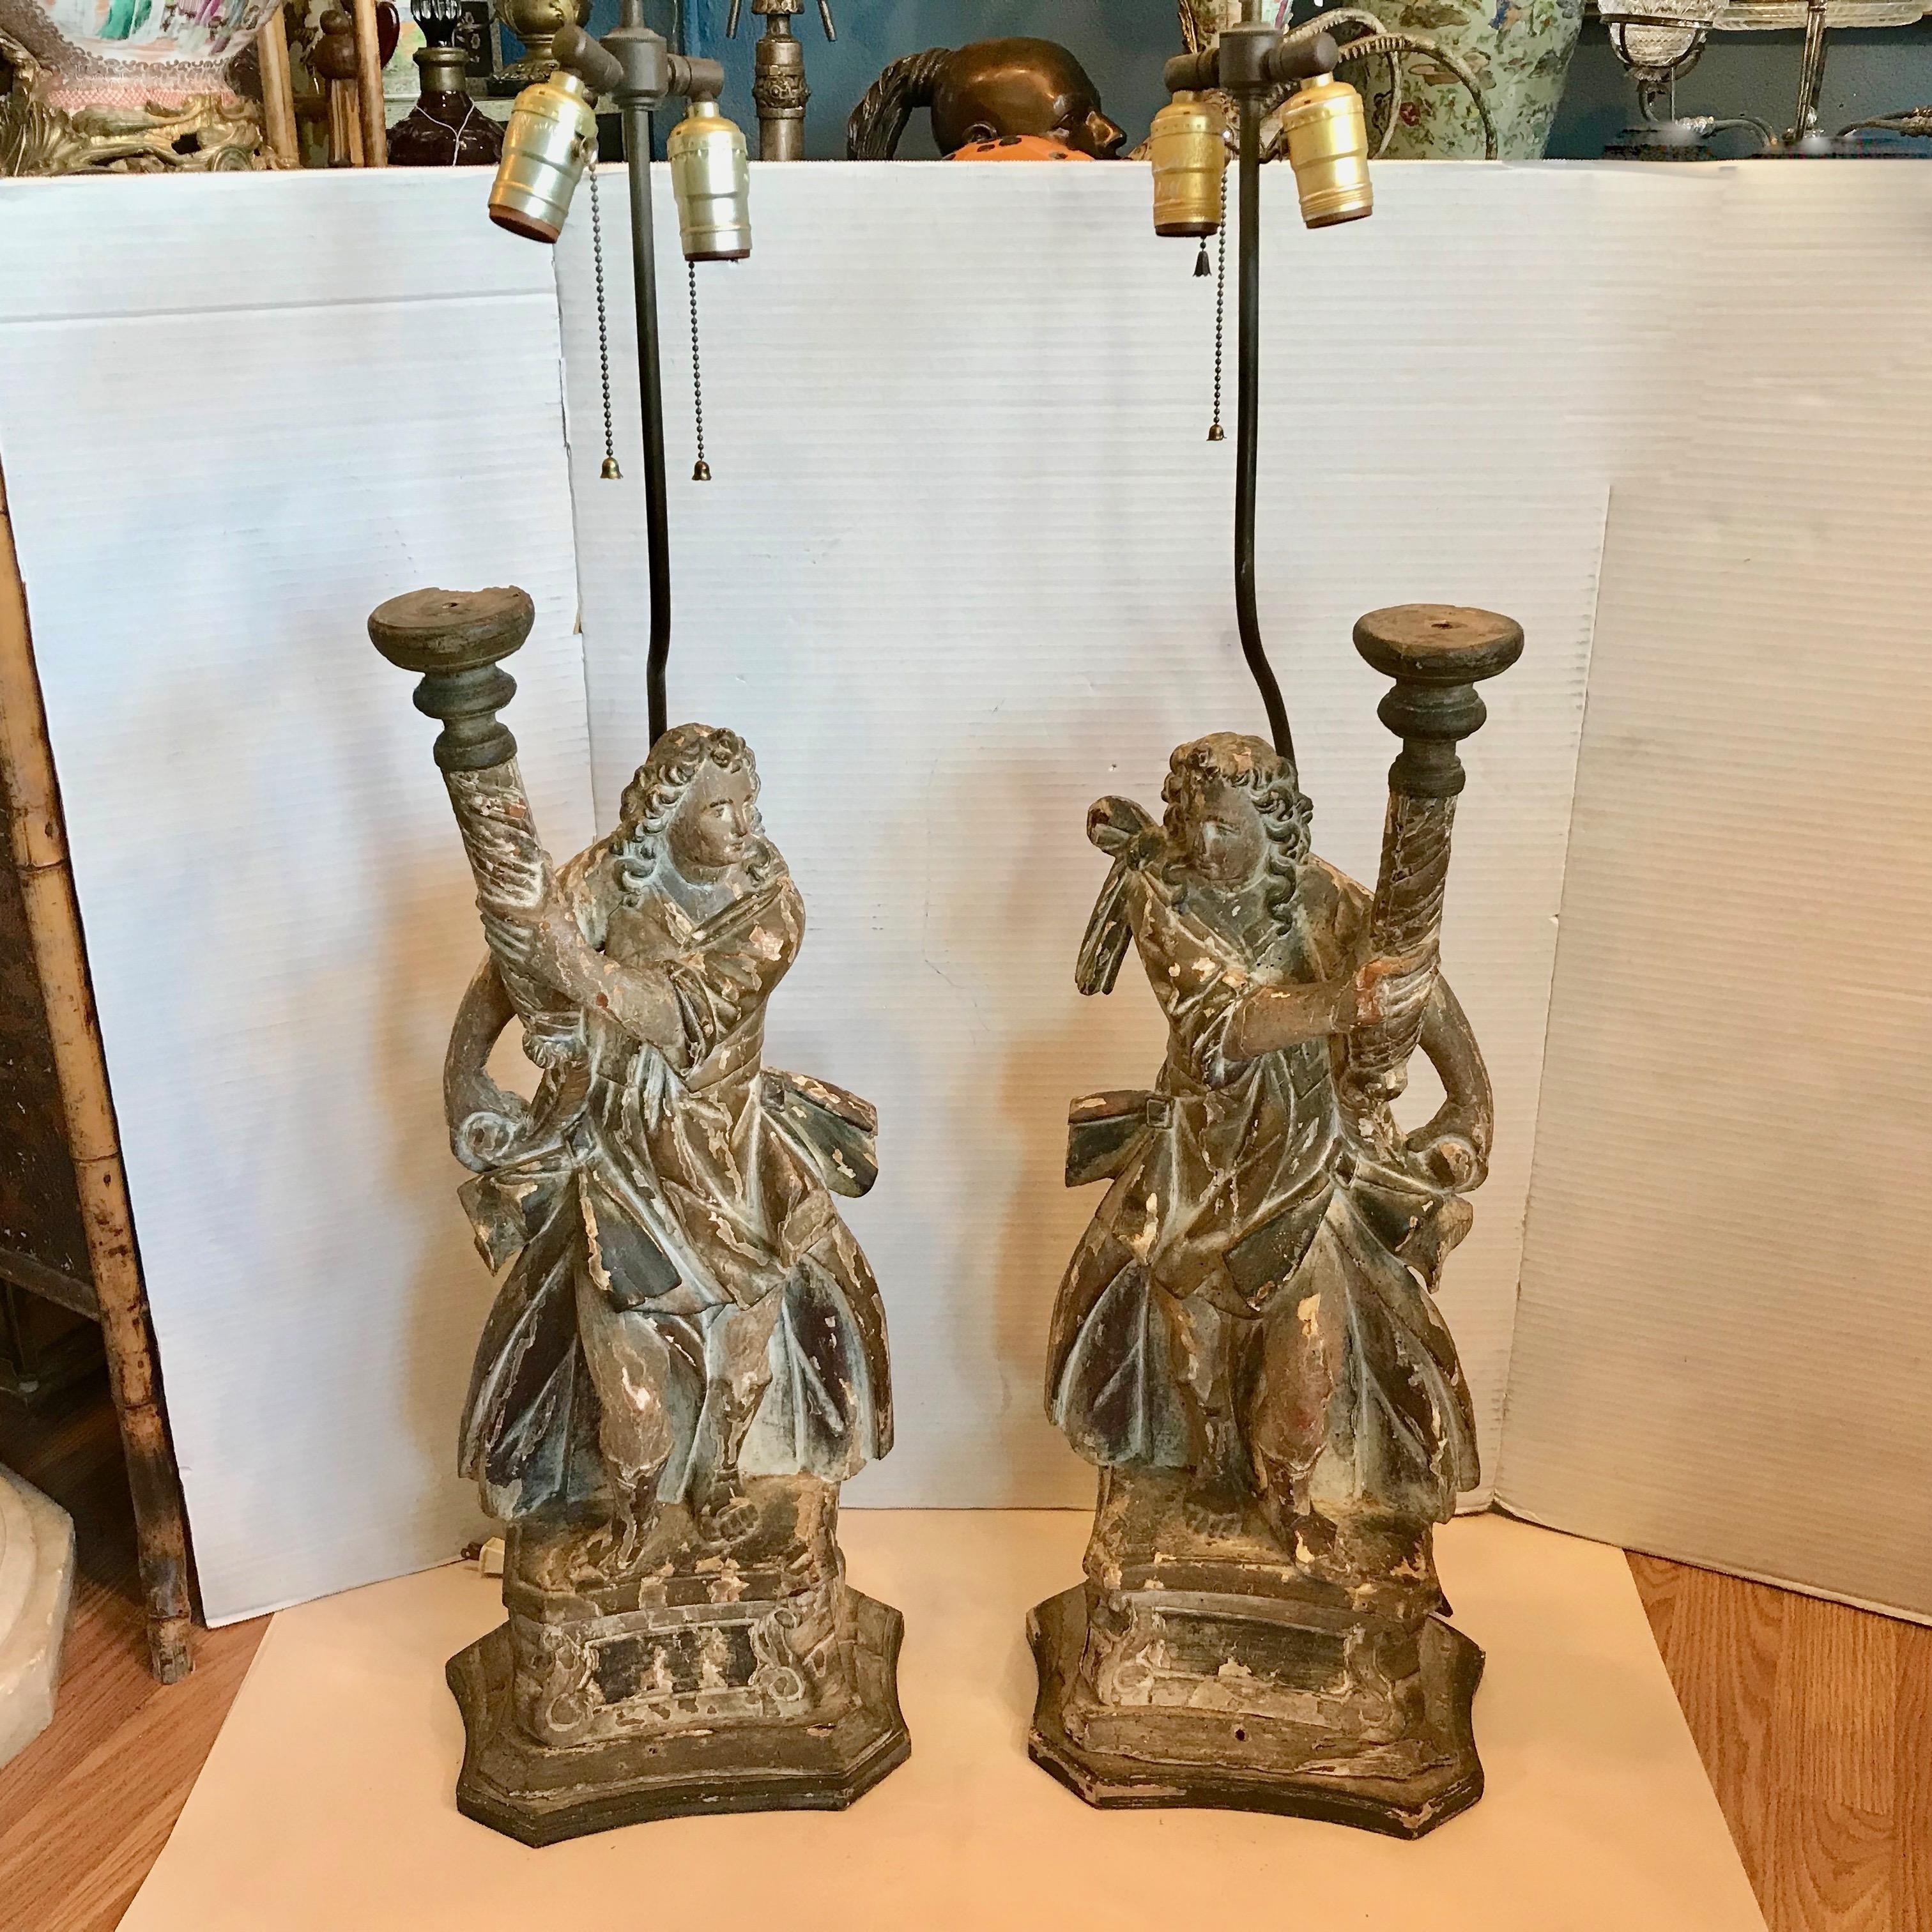 Outstanding and rare depictions. Beautifully carved opposing figures - probably angels, designed with flowing robes. The figures are 
dramatic in form and scale. The natural wood has remnants of old
gesso as they were probably originally gilded or